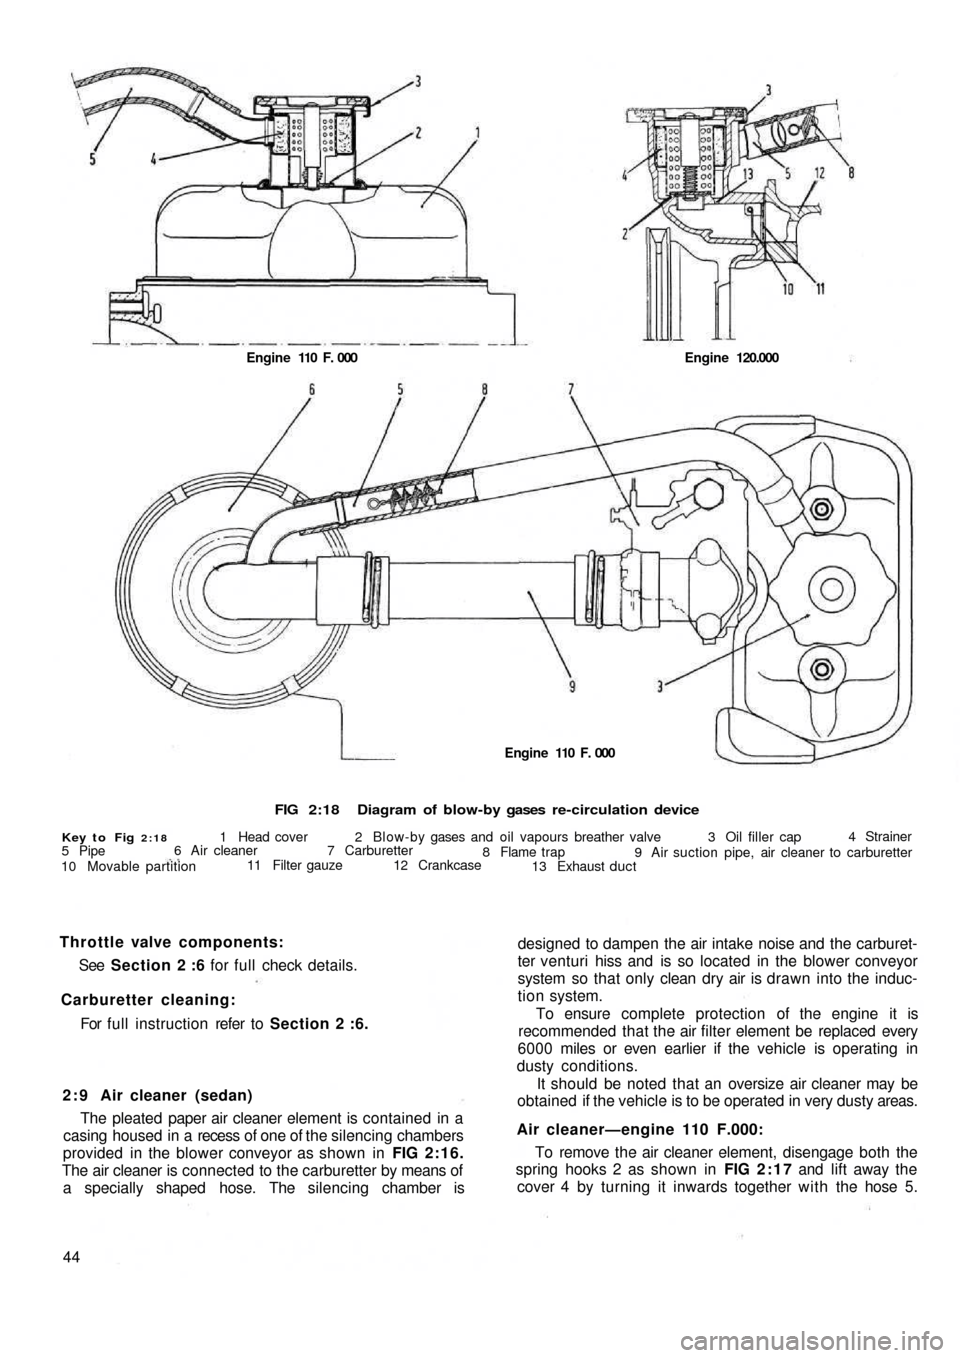 FIAT 500 1969 1.G Workshop Manual FIG 2:18Diagram of blow-by gases  re-circulation device
Key to Fig 2:181 Head cover 2 Blow-by gases and  oil vapours breather valve 3 Oil filler cap4 Strainer
9 Air suction pipe, air cleaner to carbur